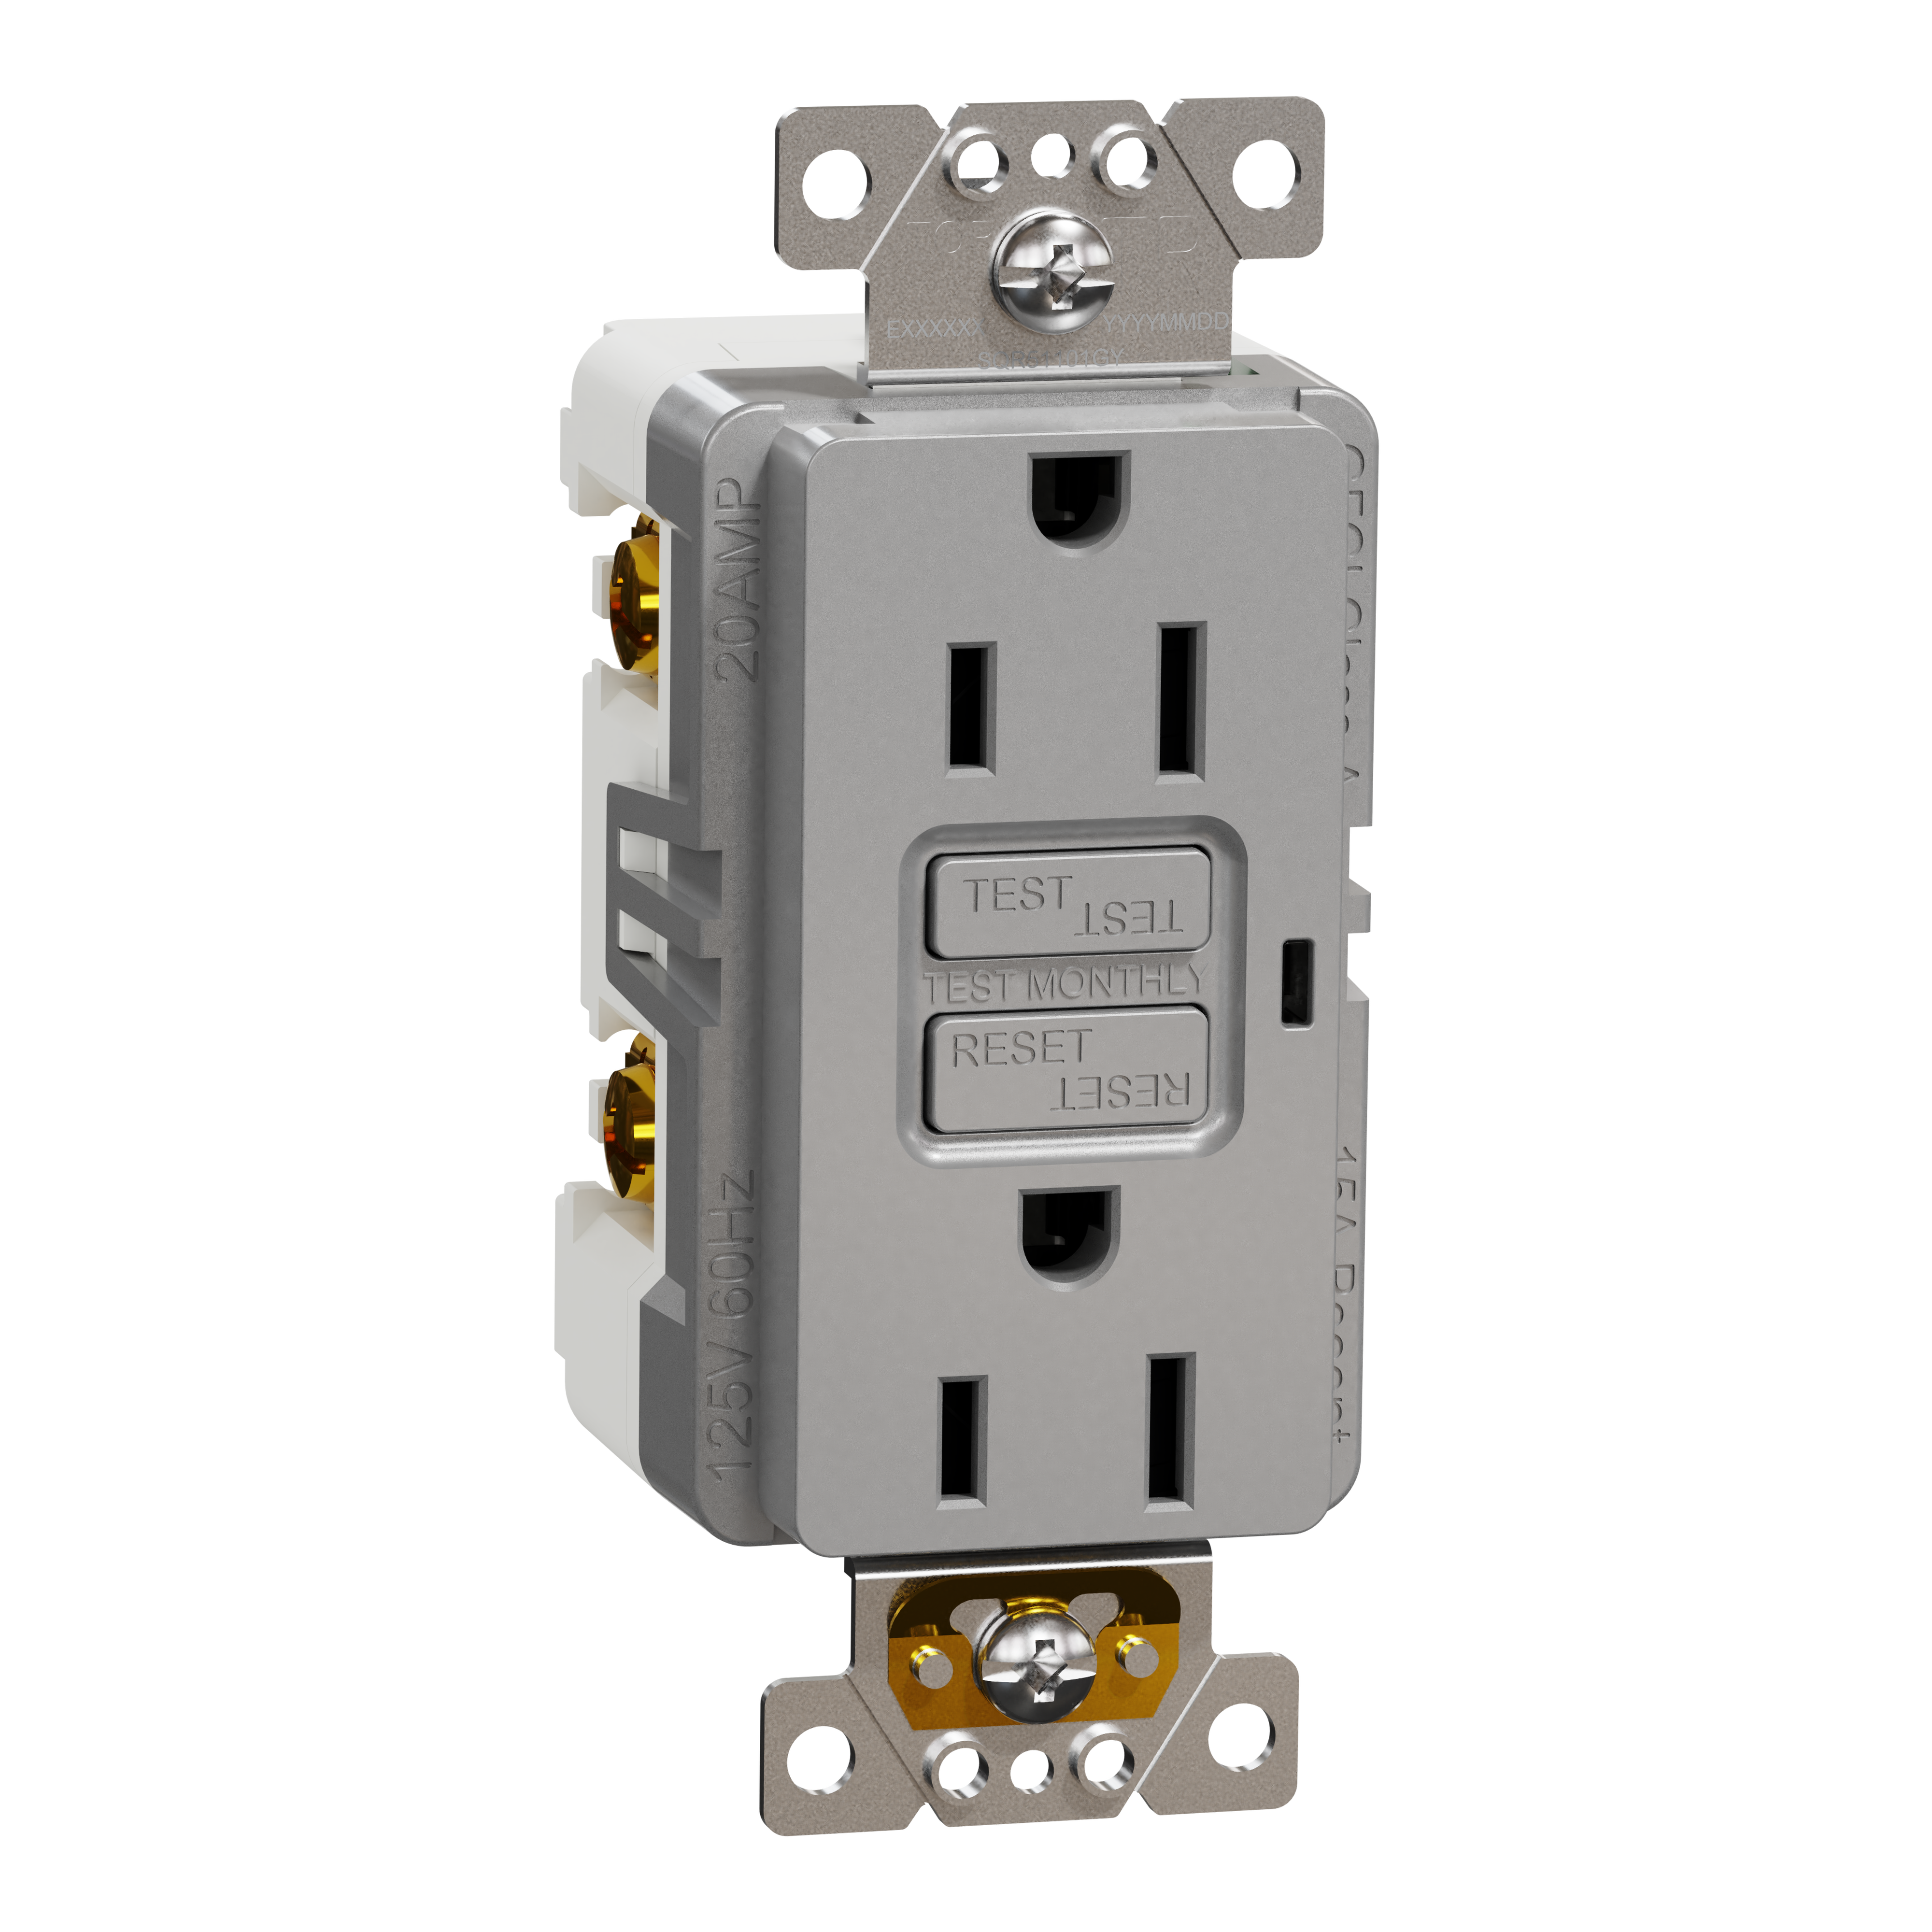 Socket-outlet, X Series, 15A, decorator, GFCI, tamper resistant, residential, gray, matte finish